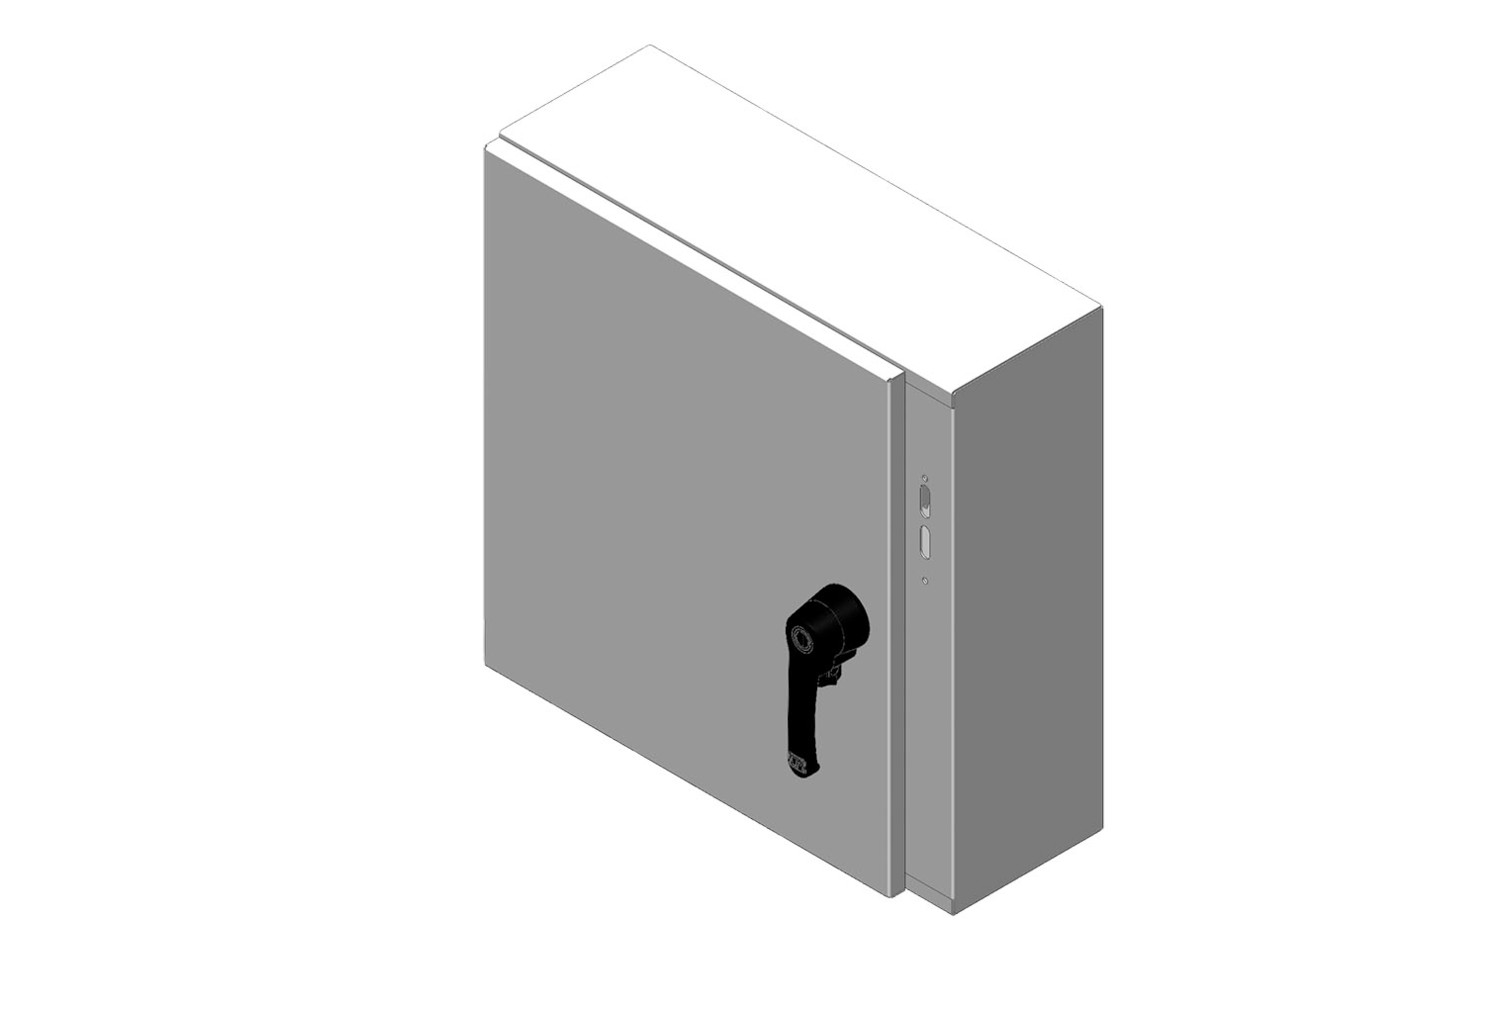 RMR Standard Wall-Mount Disconnect Enclosure, Type 4, with Solid Single Door - Image 1